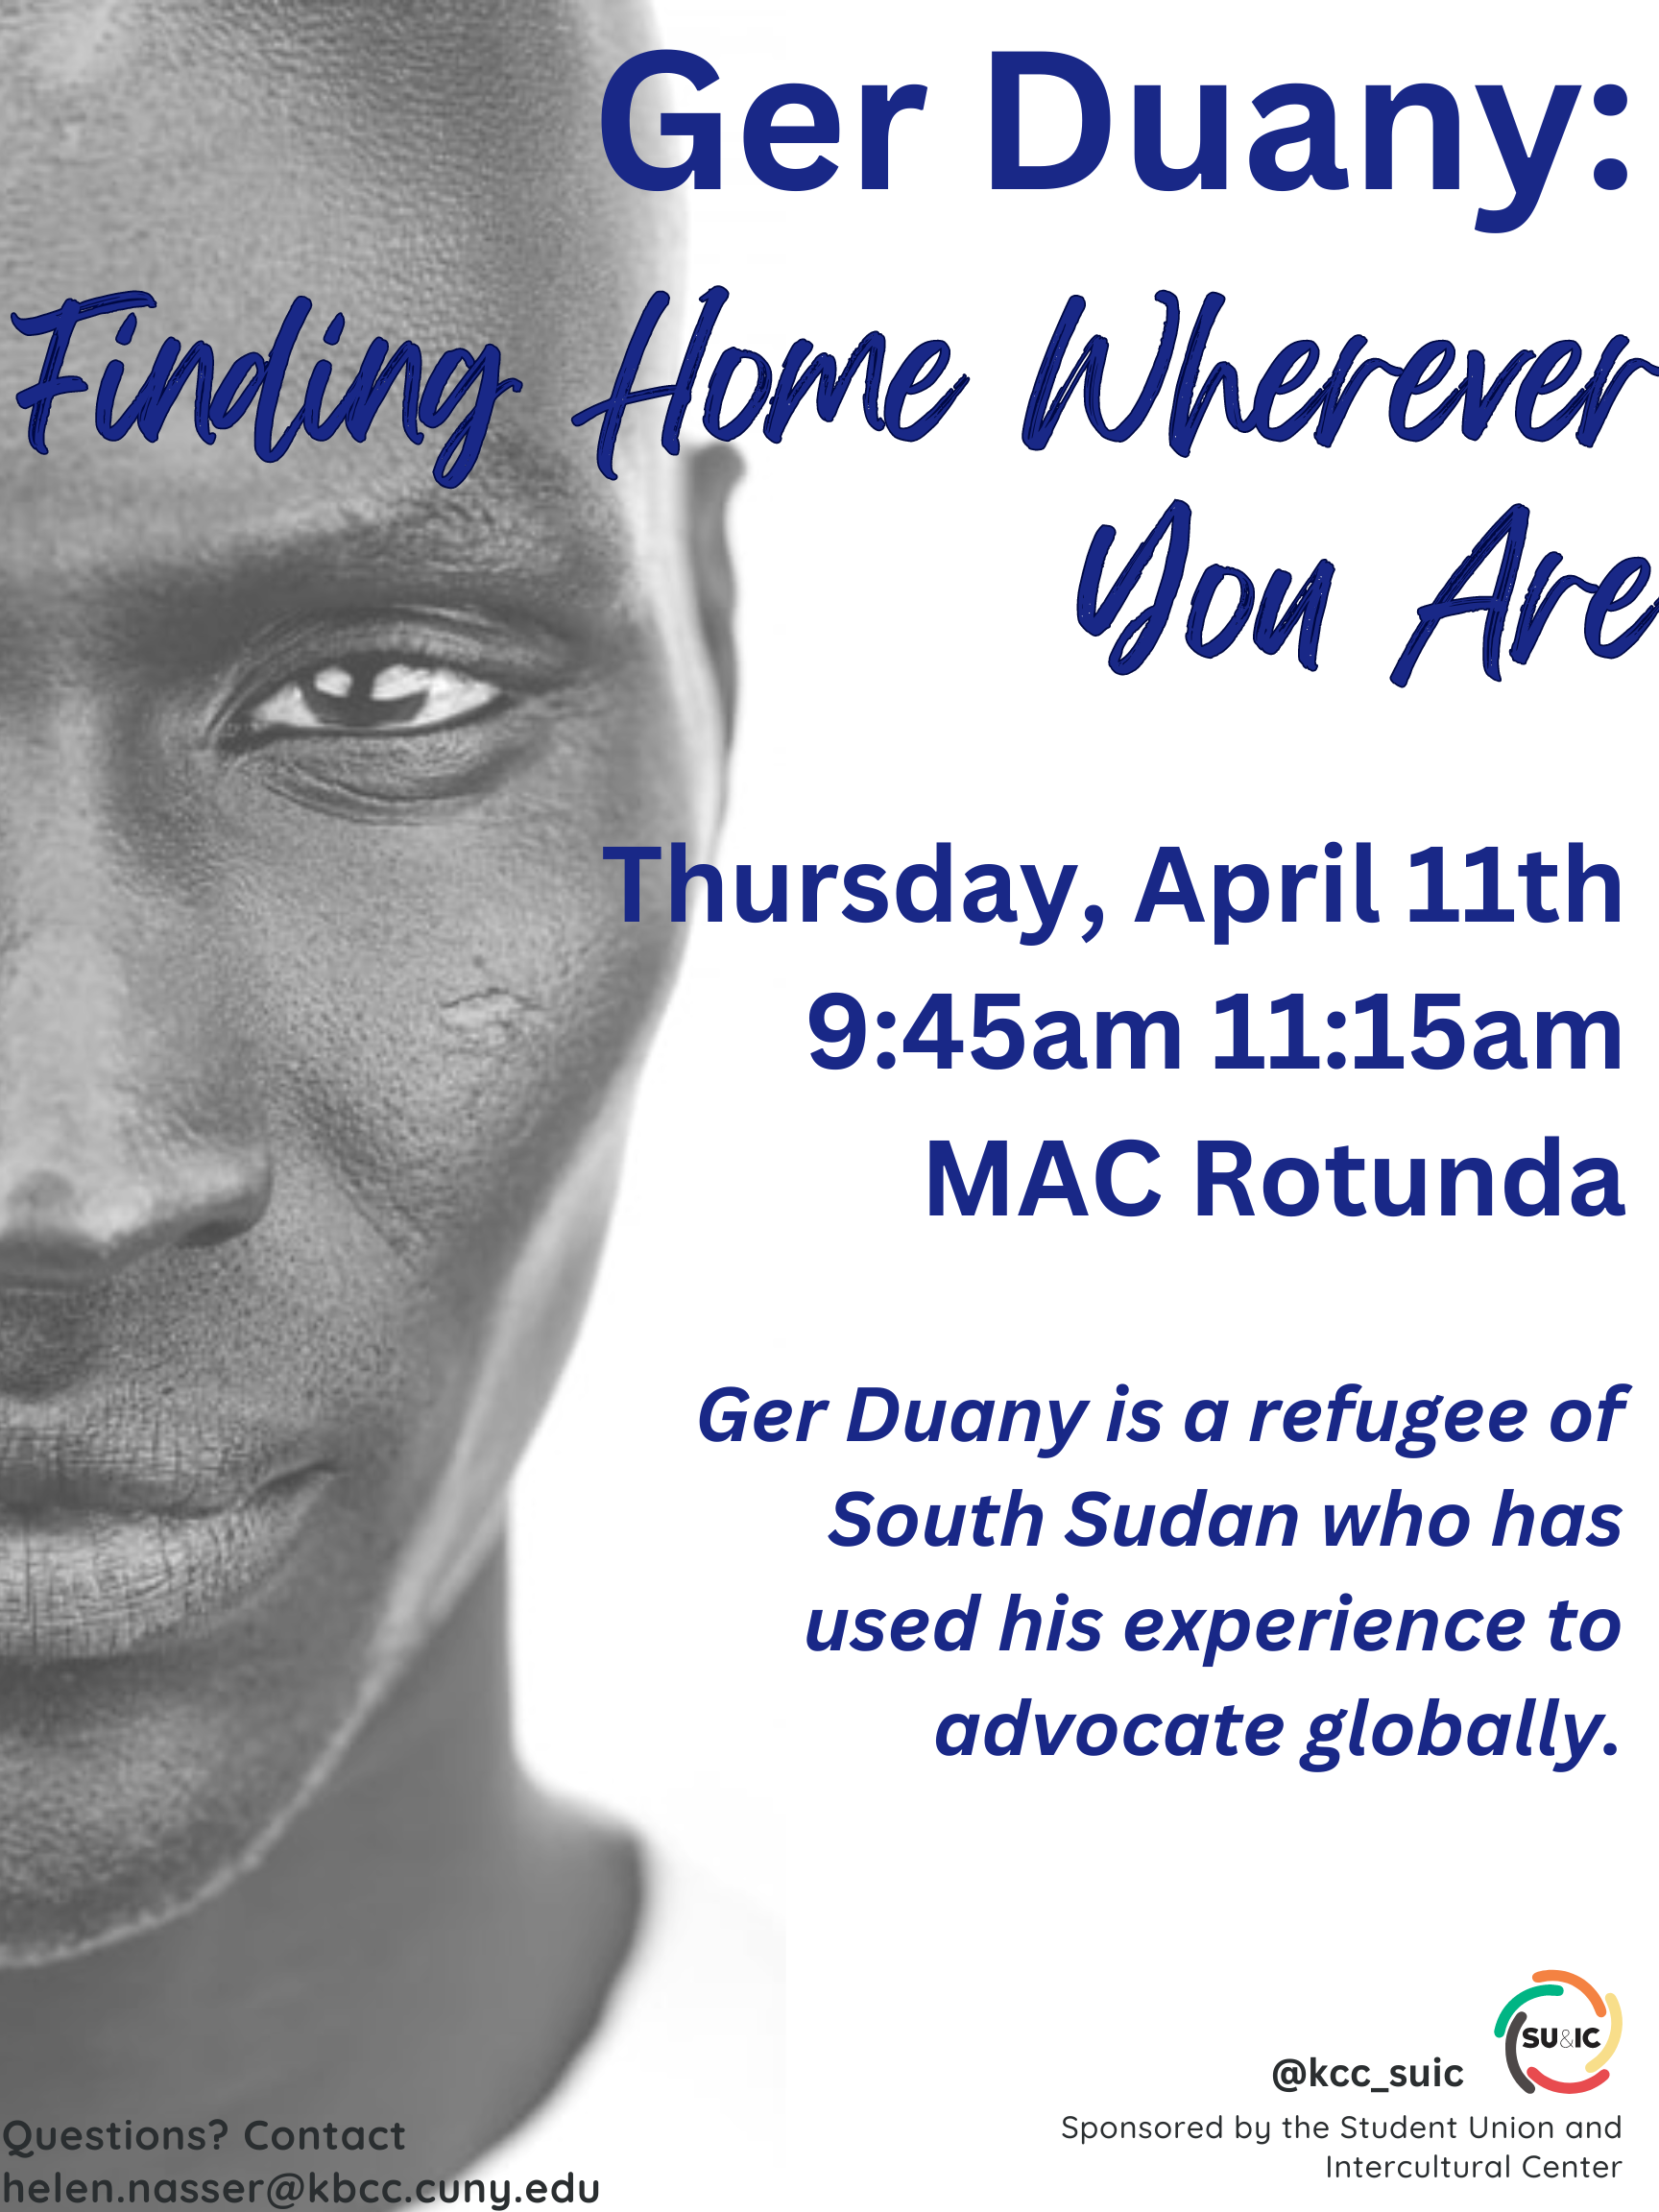 Ger Duany: Finding Home Wherever You Are